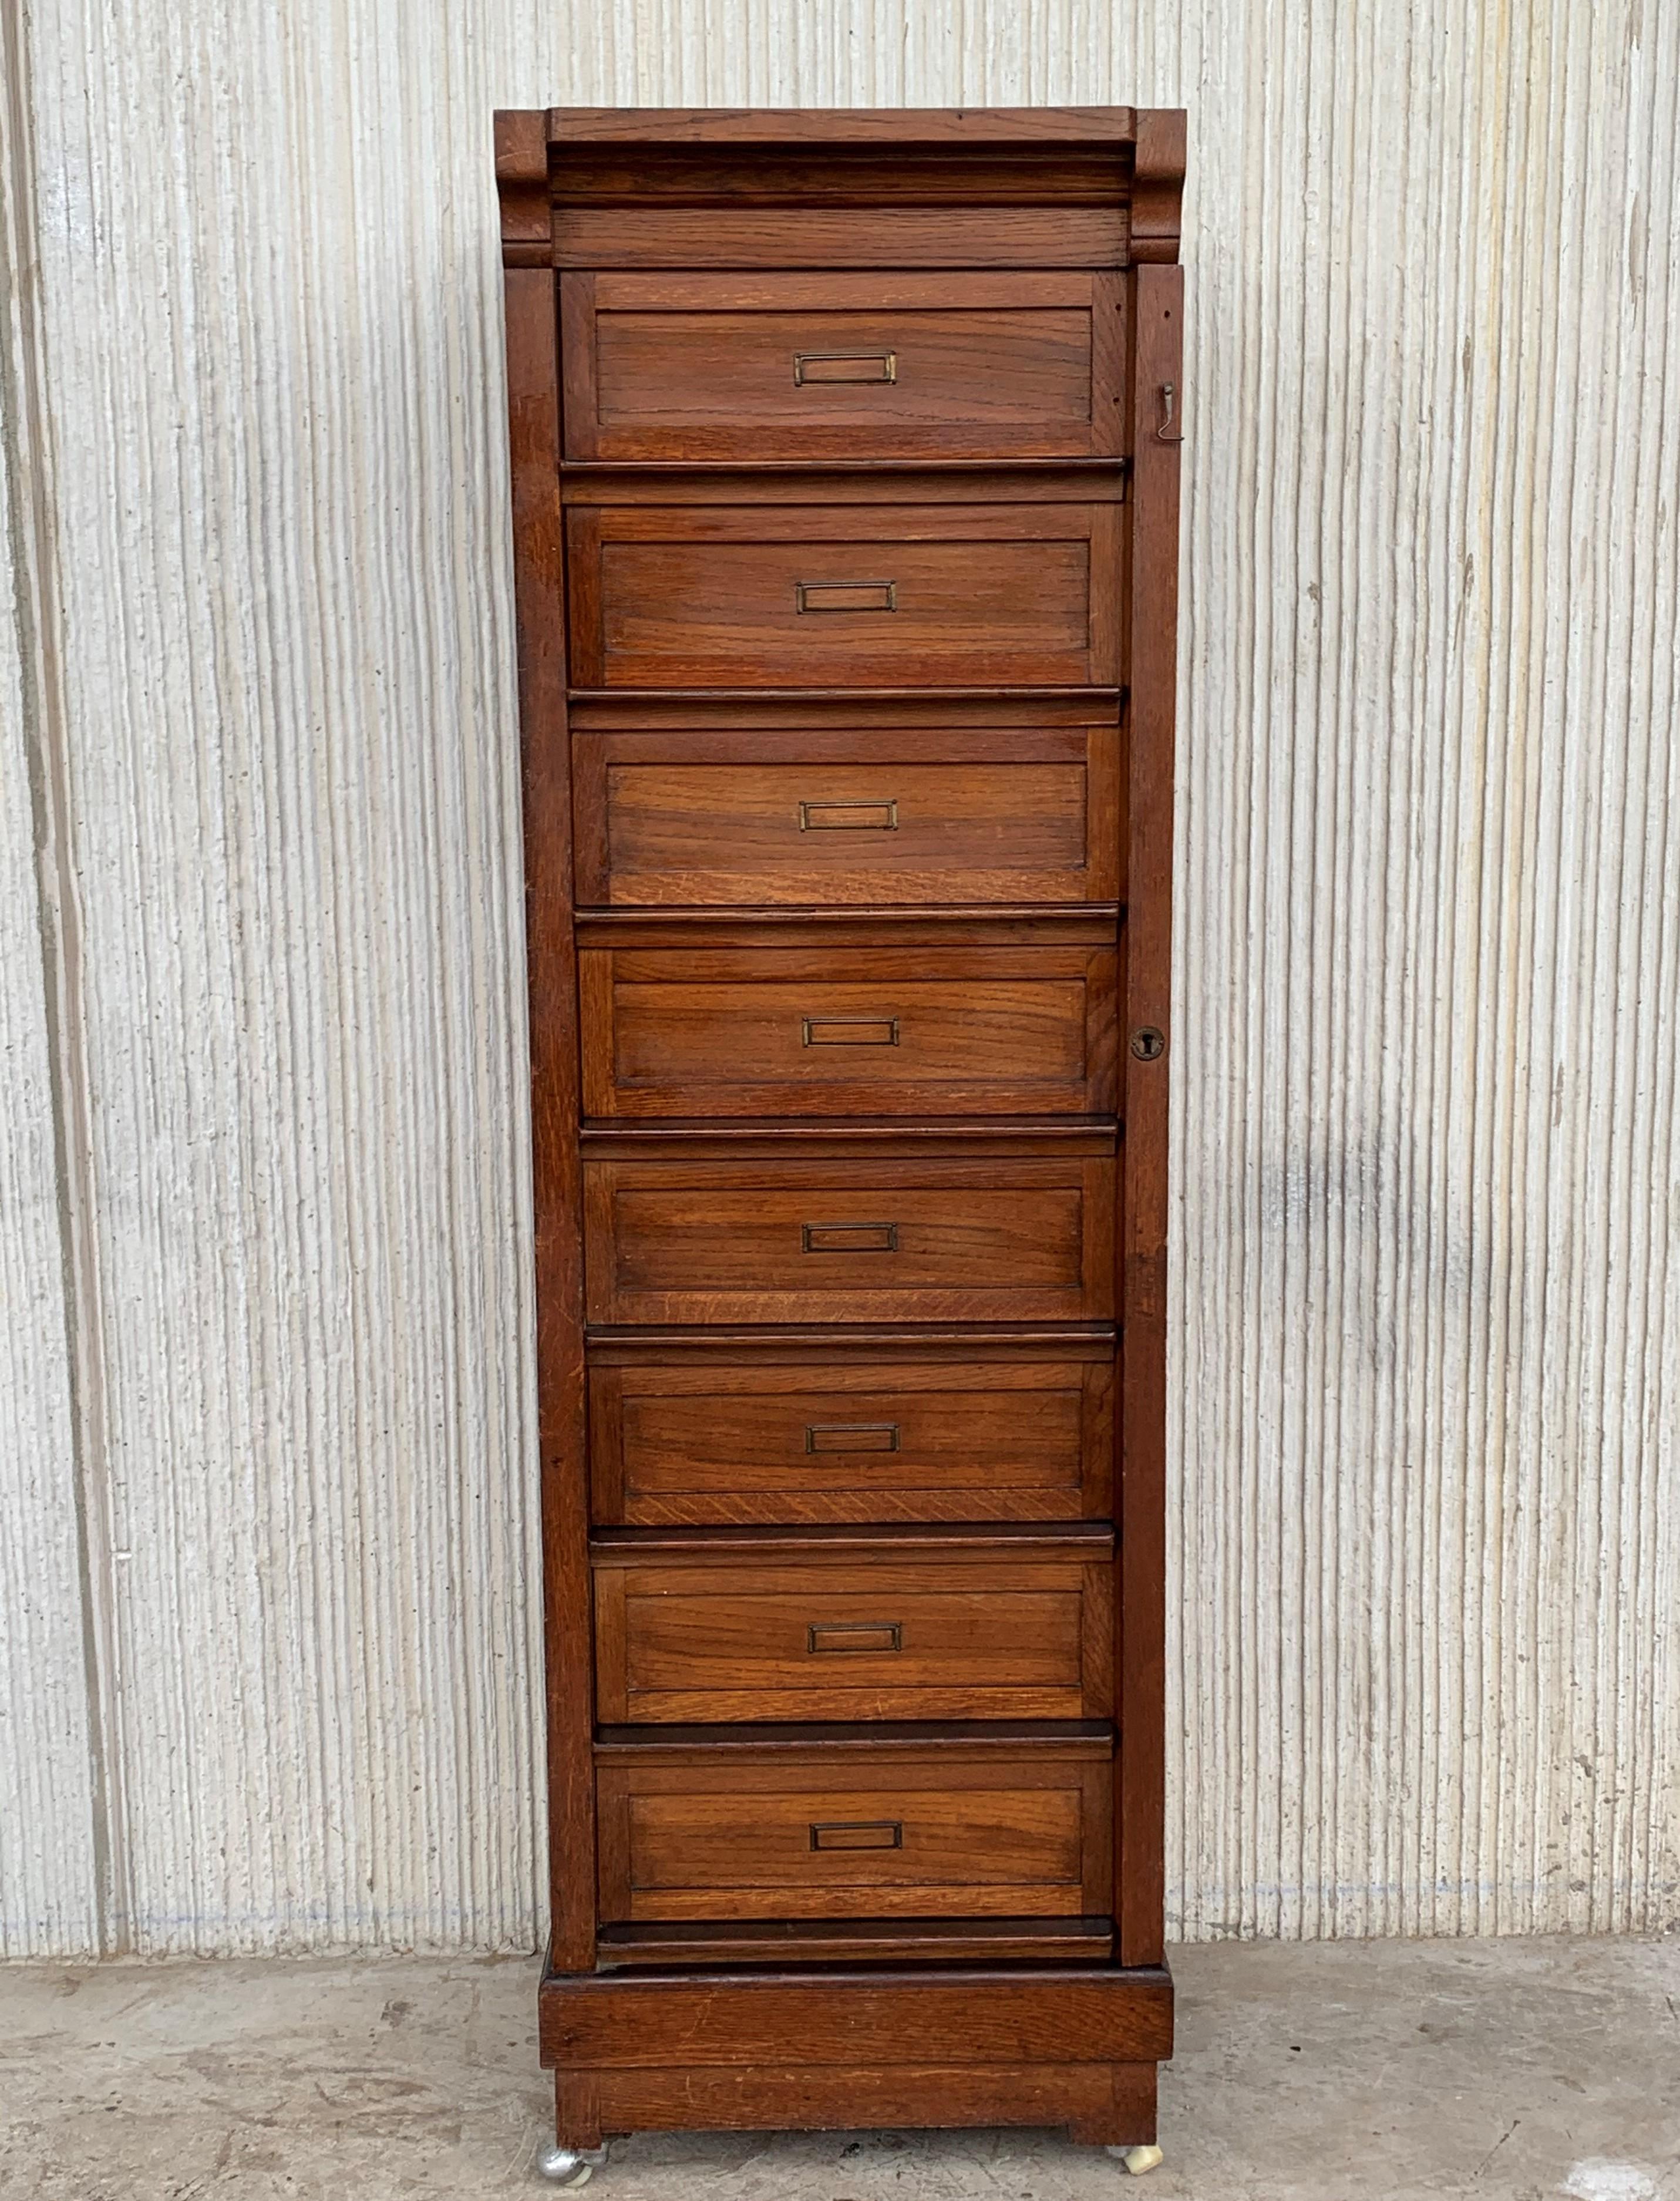 This is a good looking piece, the interior has 8 sliding drawers that works perfectly.
The cabinet is made in walnut, it is in very good condition it has very few blemishes and it has a beautiful patina